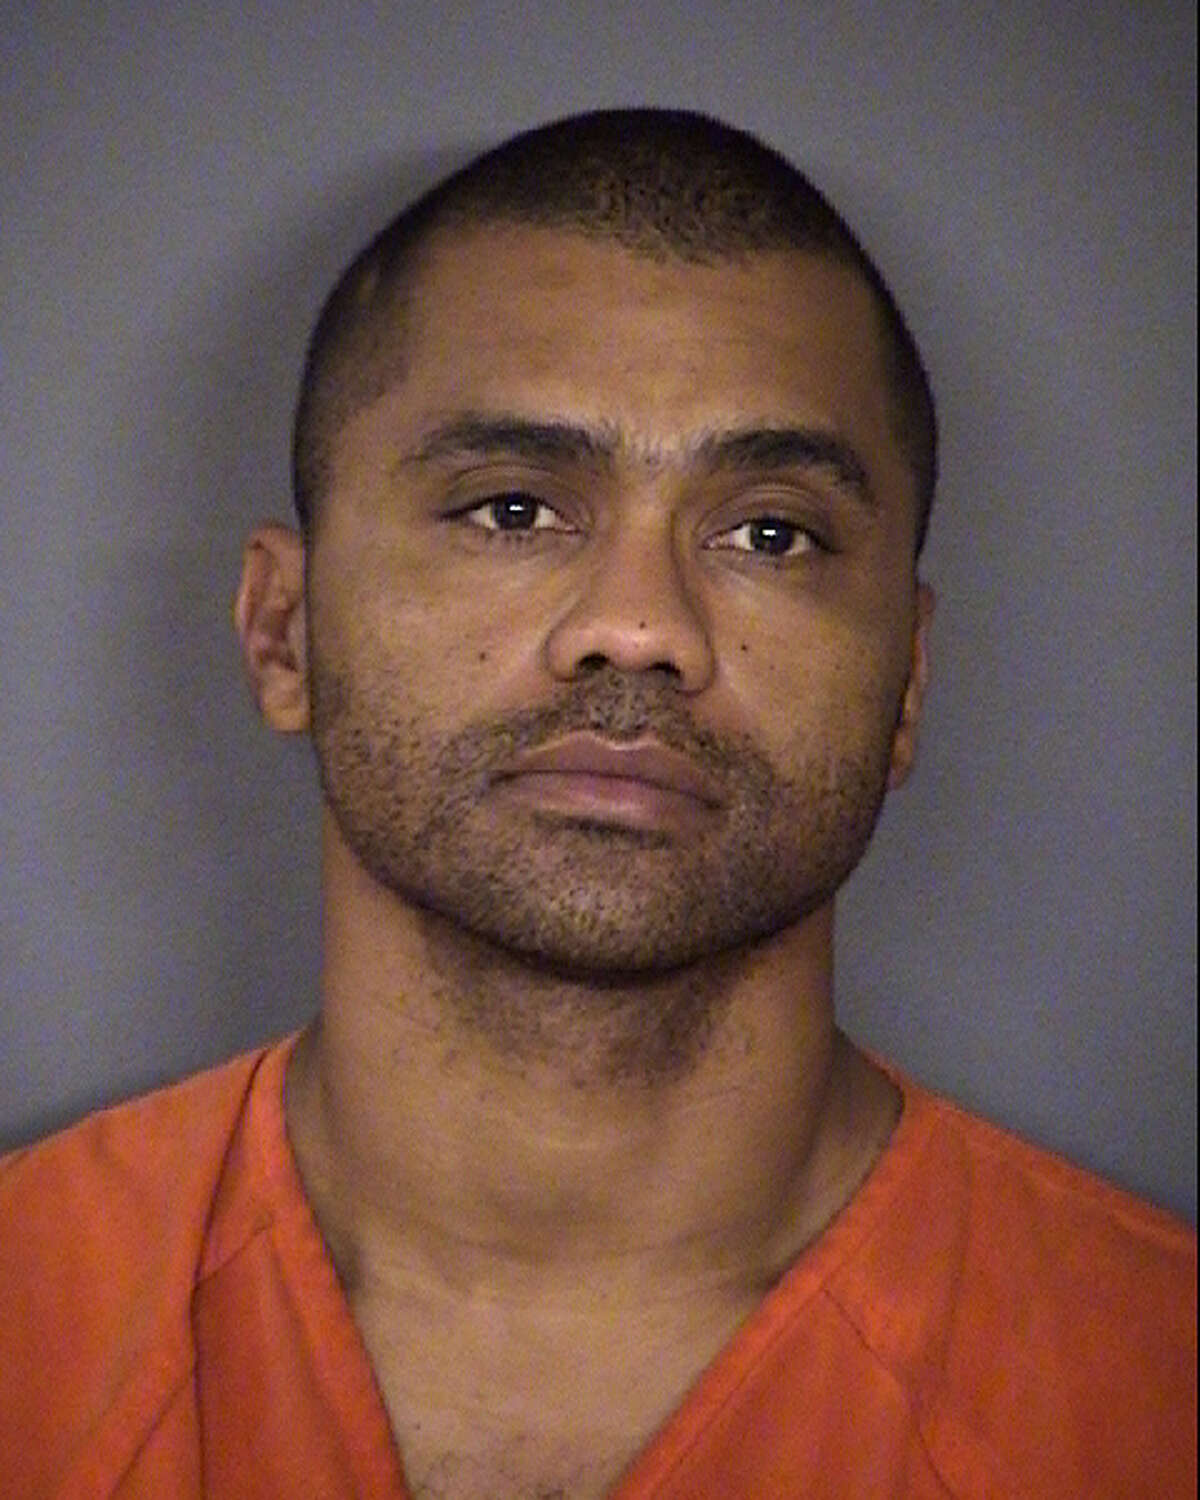 Ruben Hernandez, 39, was arrested Wednesday after allegedly shooting a man in his foot during an argument.